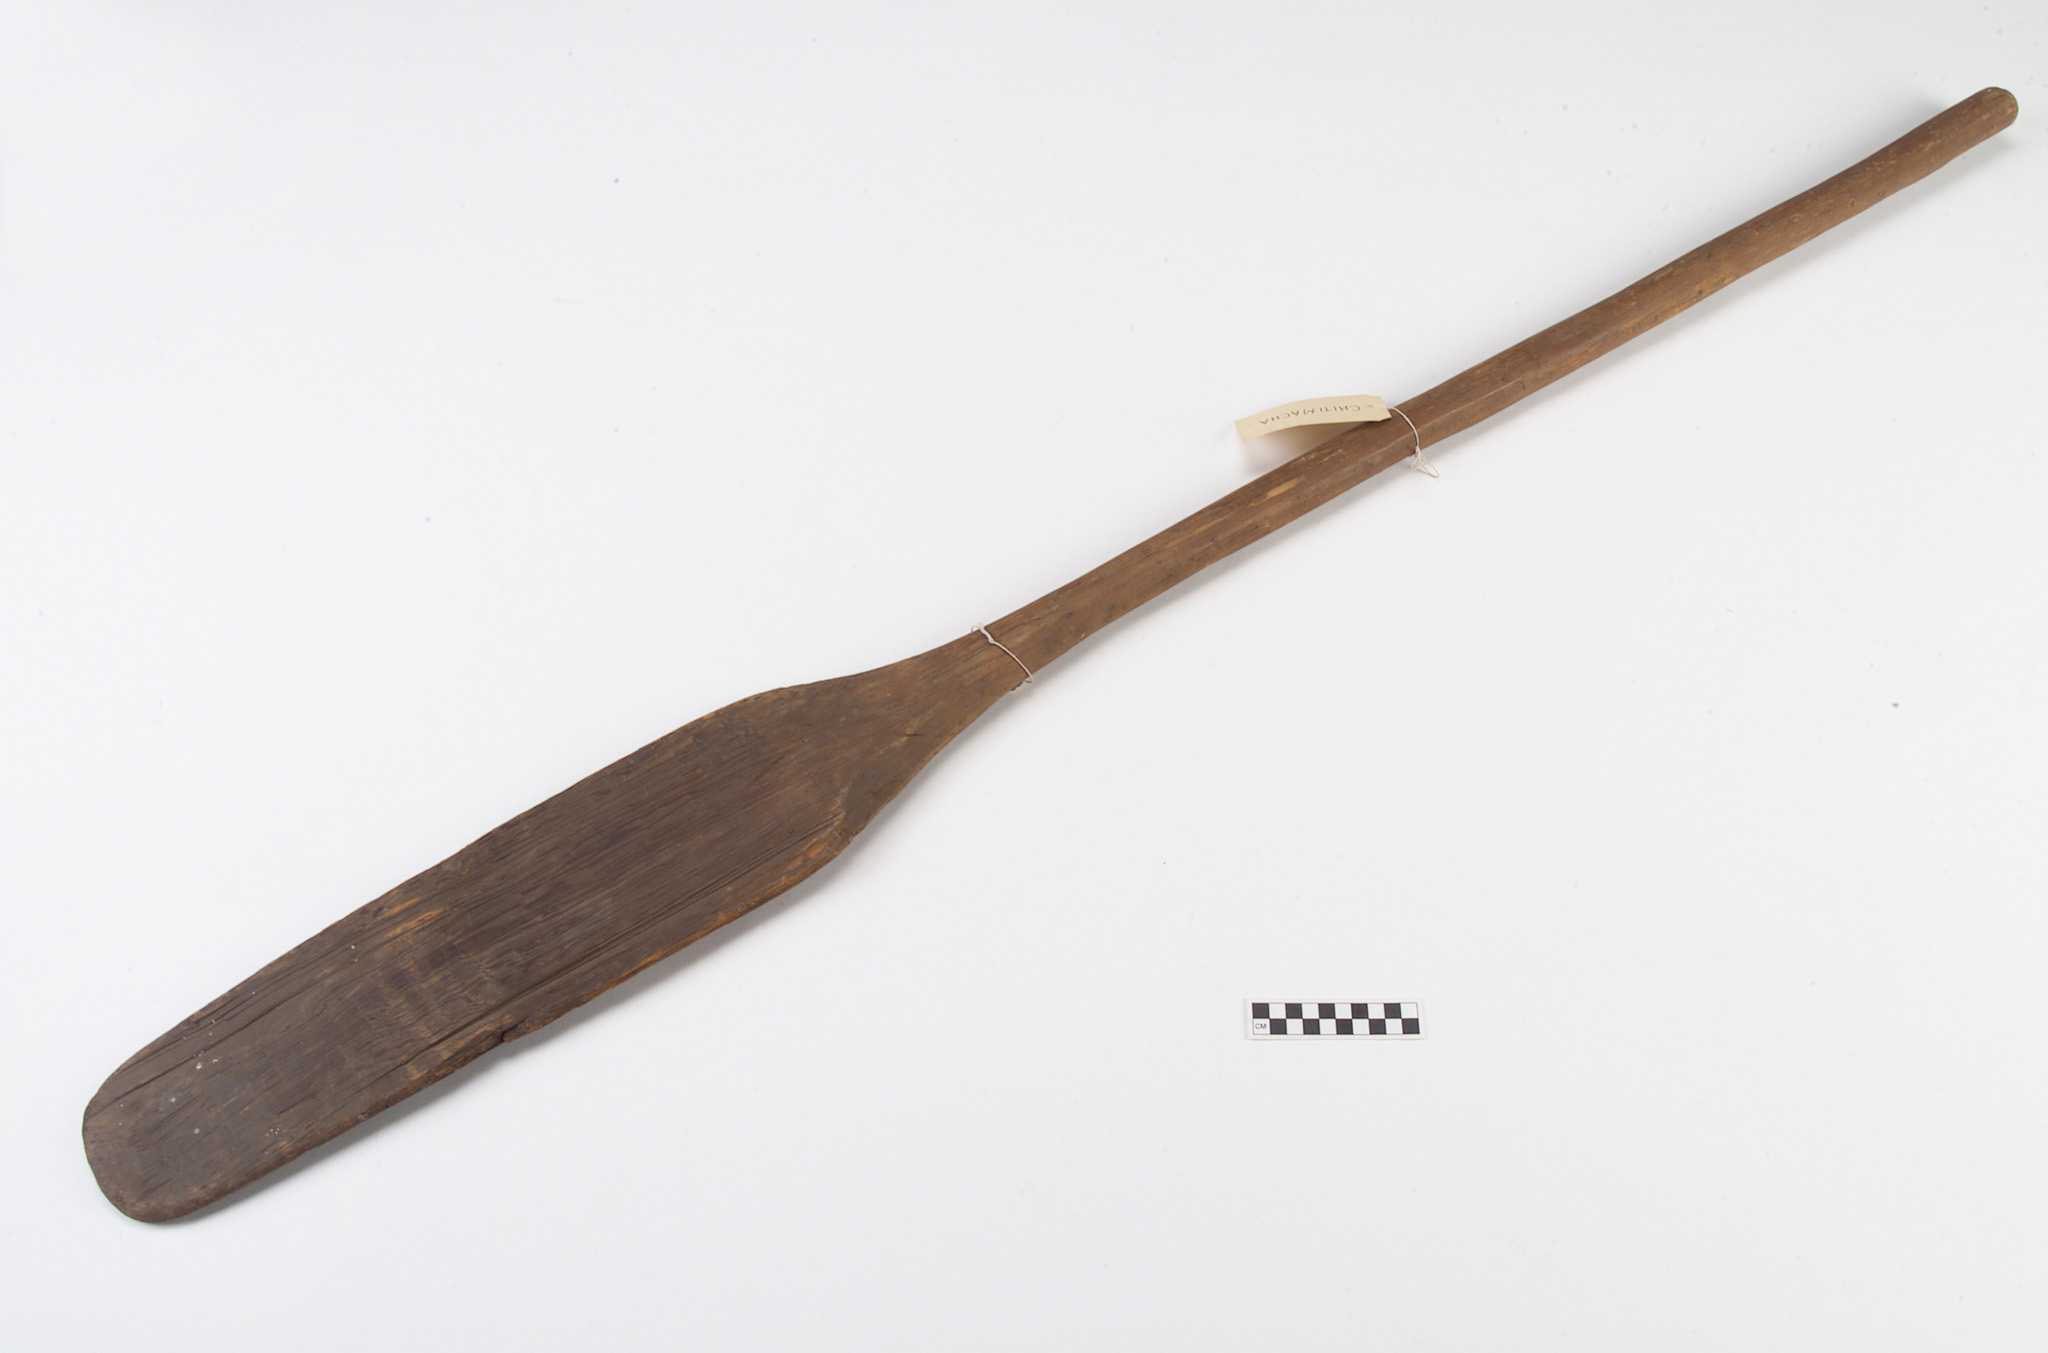 Photograph of a paddle